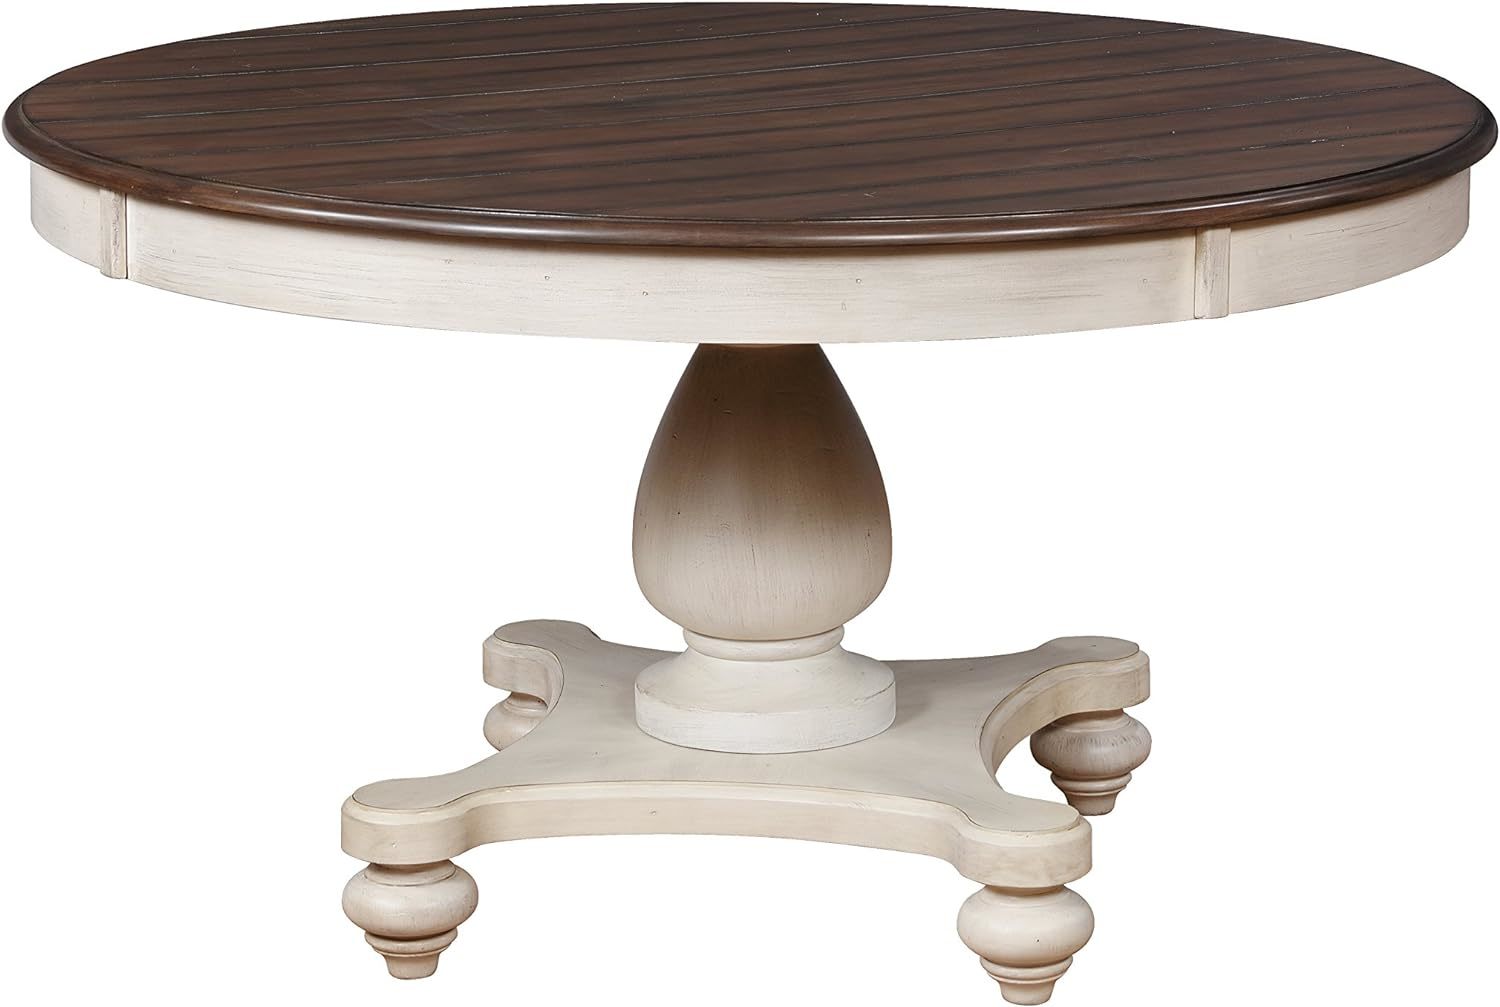 Roundhill Furniture Arch Weathered Round Dining Table Pedastal Base, Multicolor. - $718.96